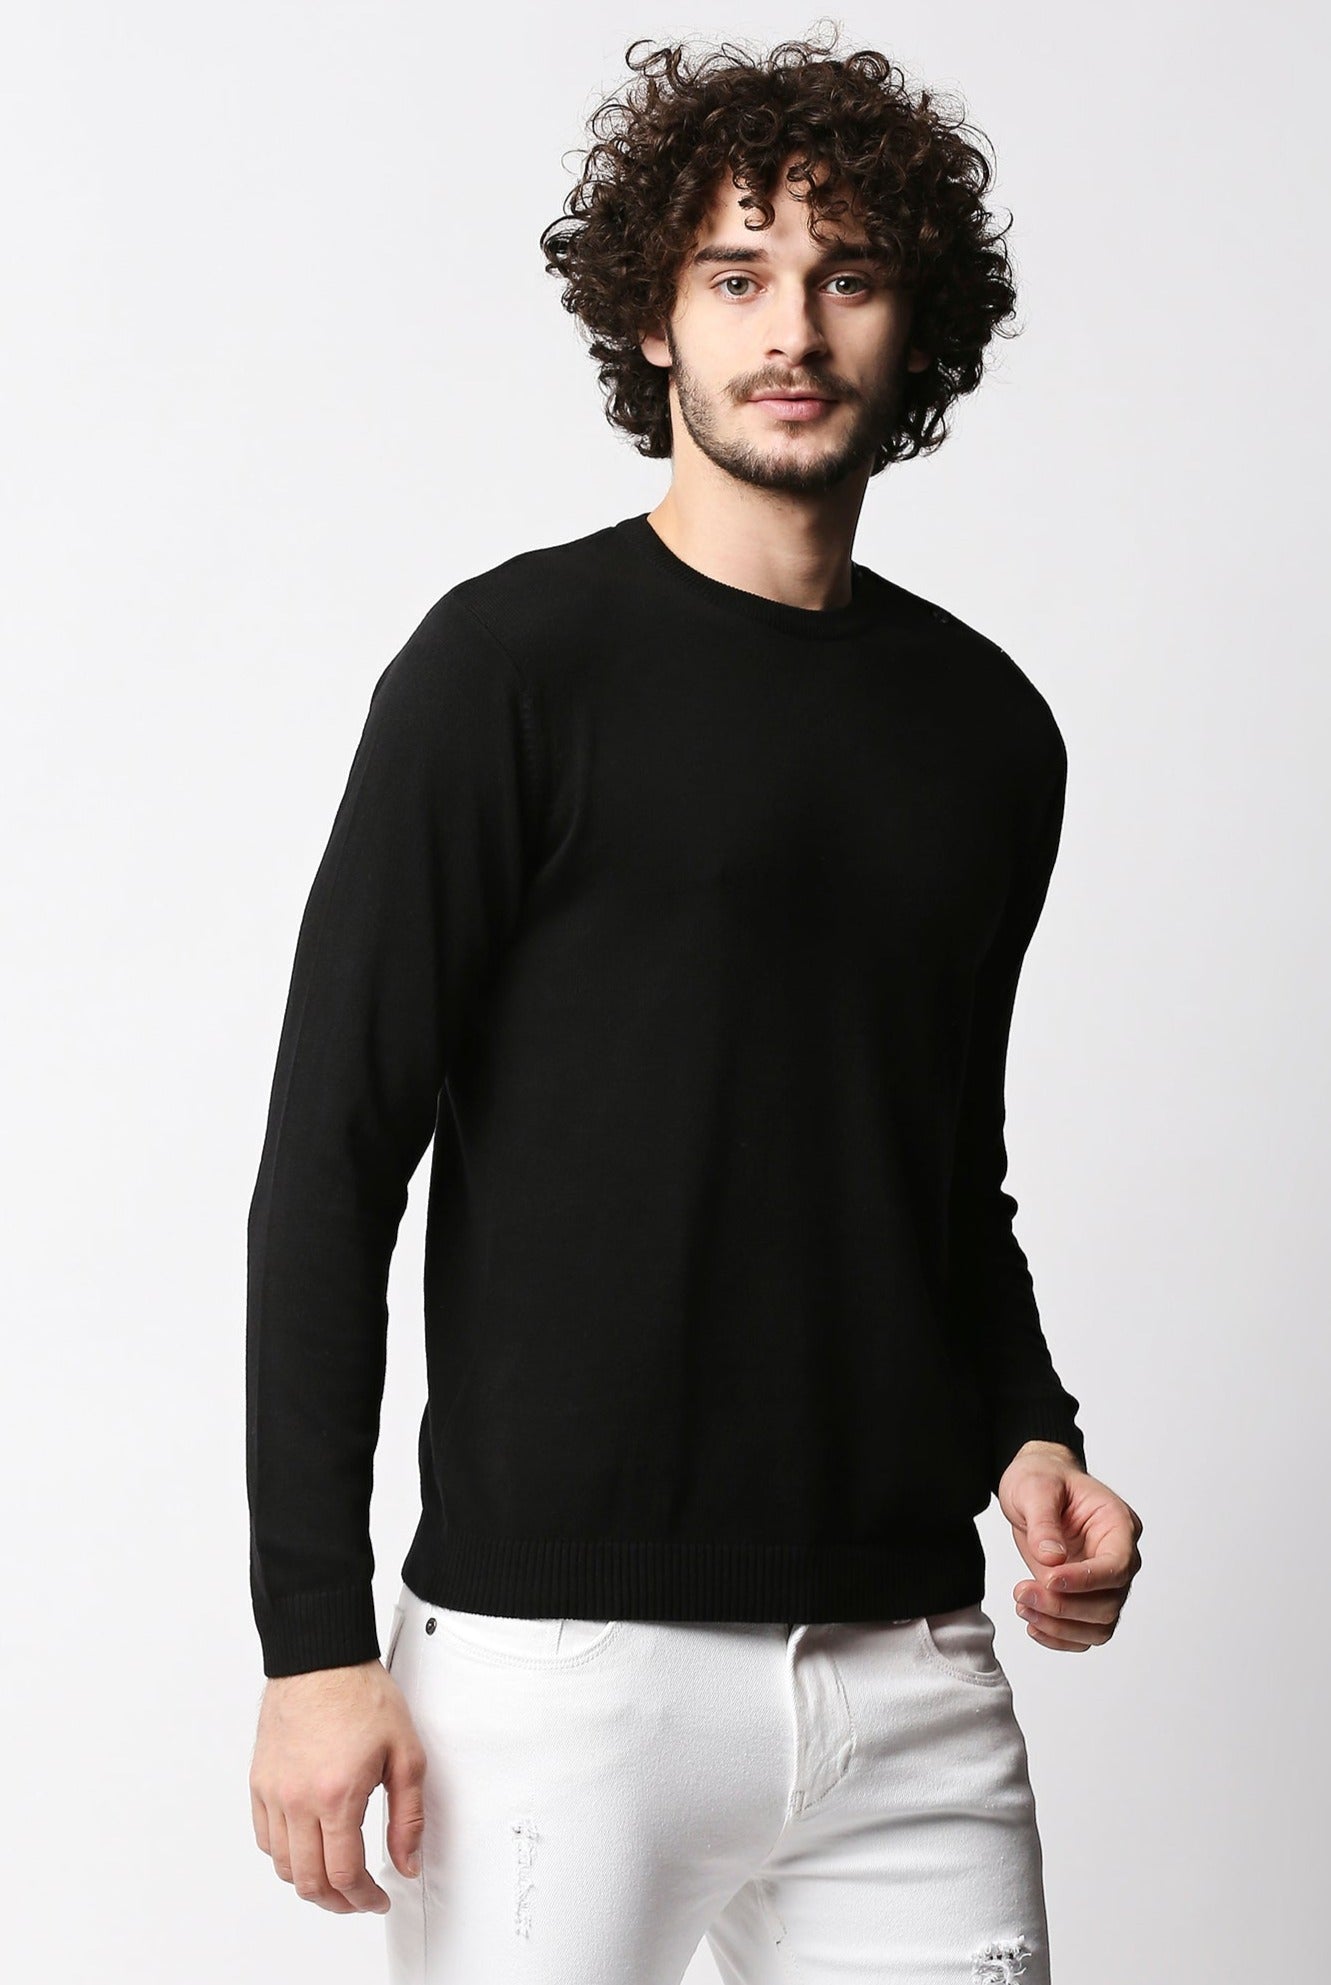 Fostino Black Knitted Full Sleeves T-shirt with button on one shoulder - Fostino - Shirts & Tops